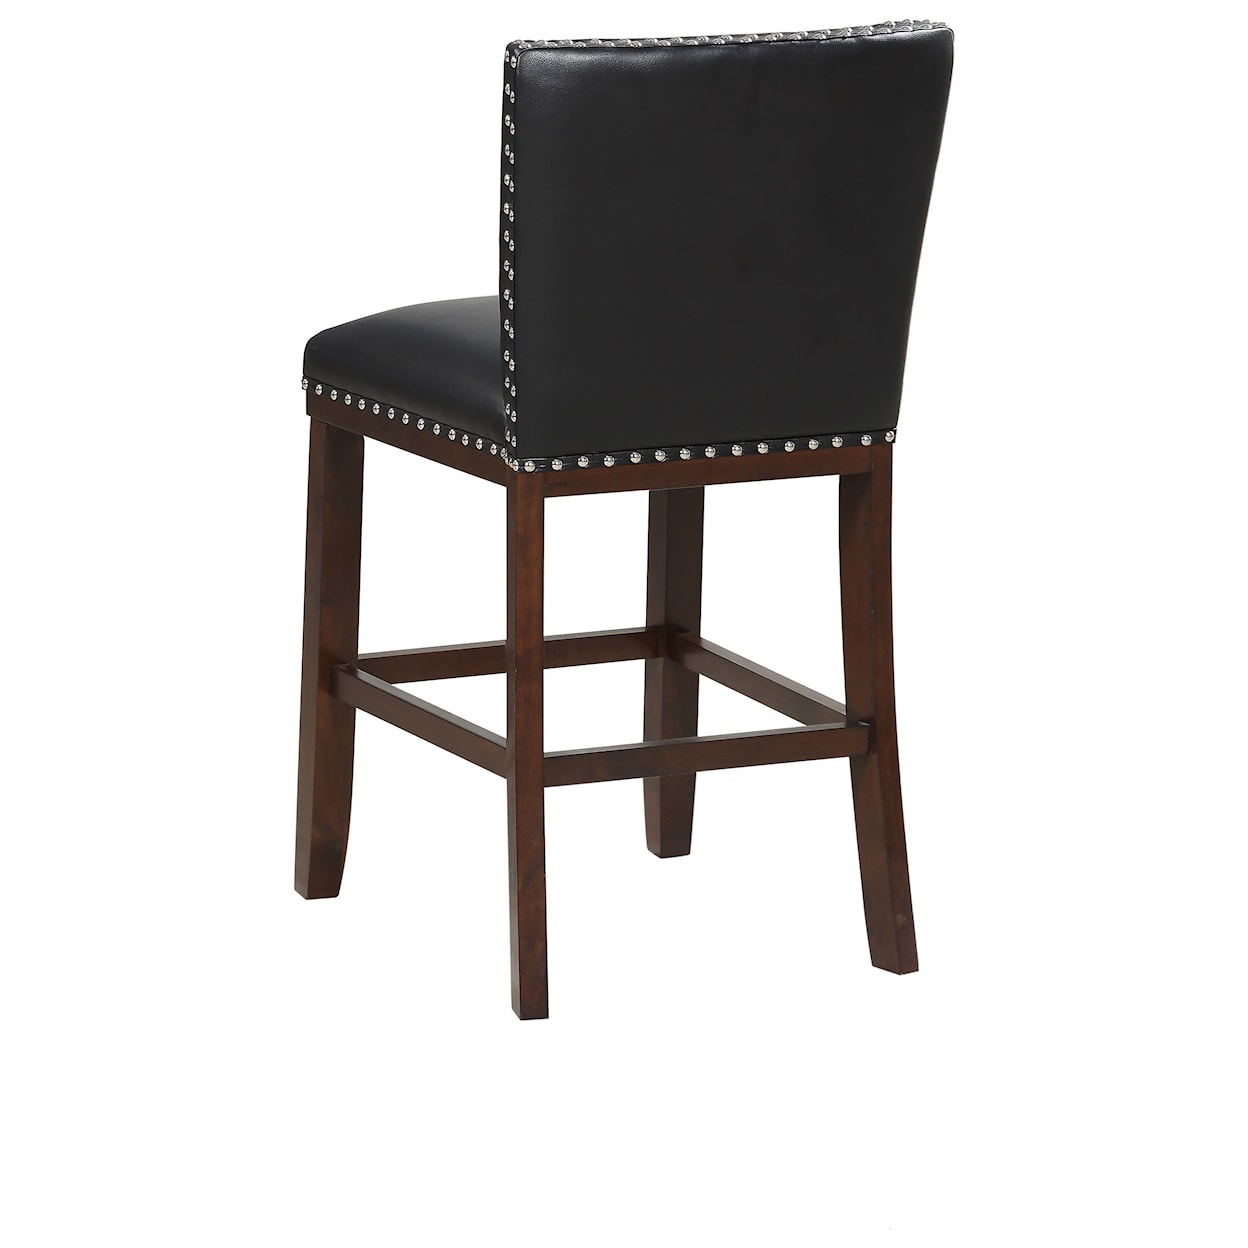 Steve Silver Tiffany Bonded Counter Chair